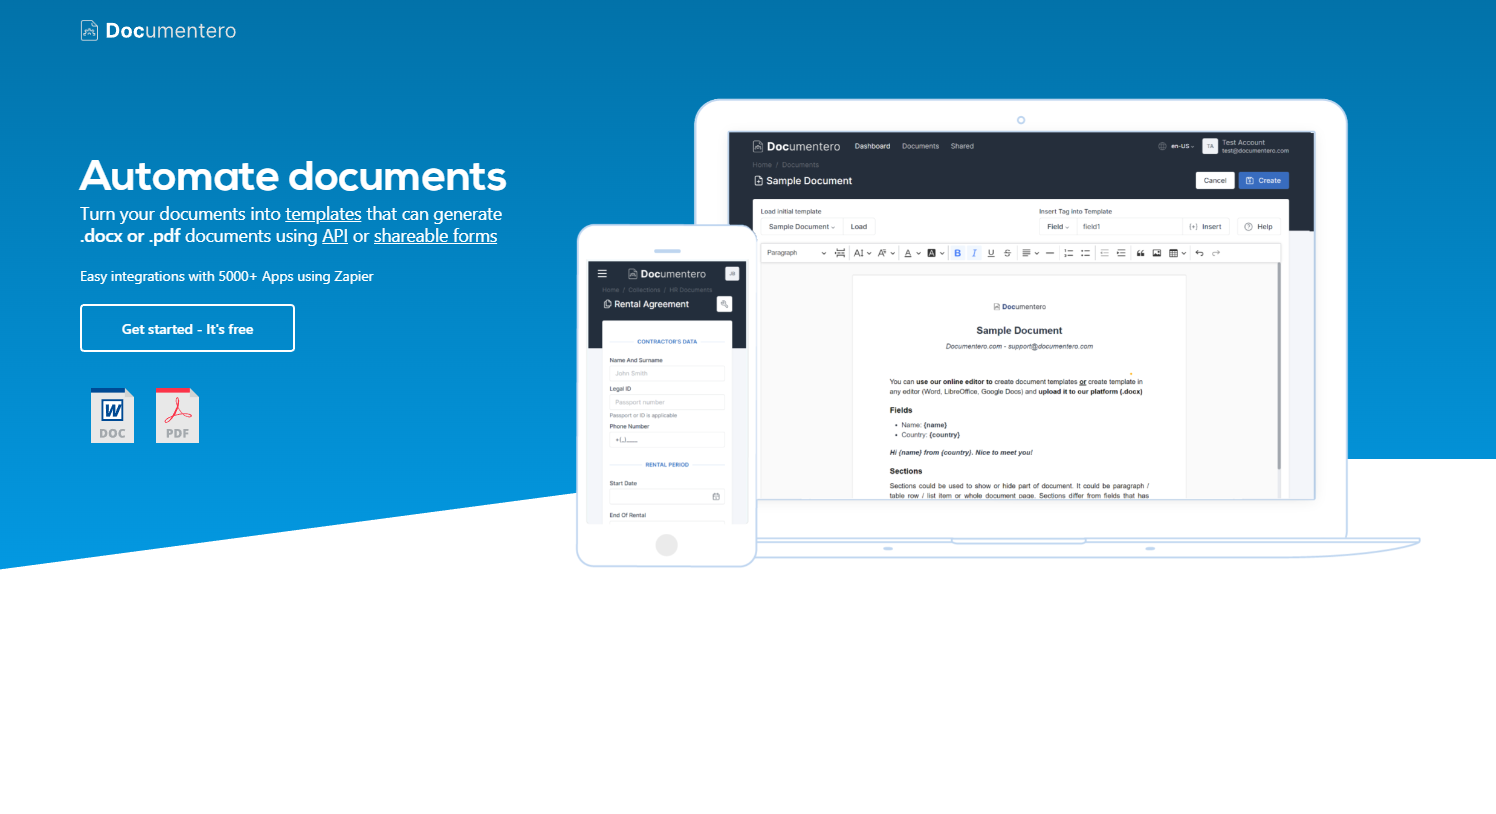 Documentero, a cloud-based documents service that helps you with document automation.